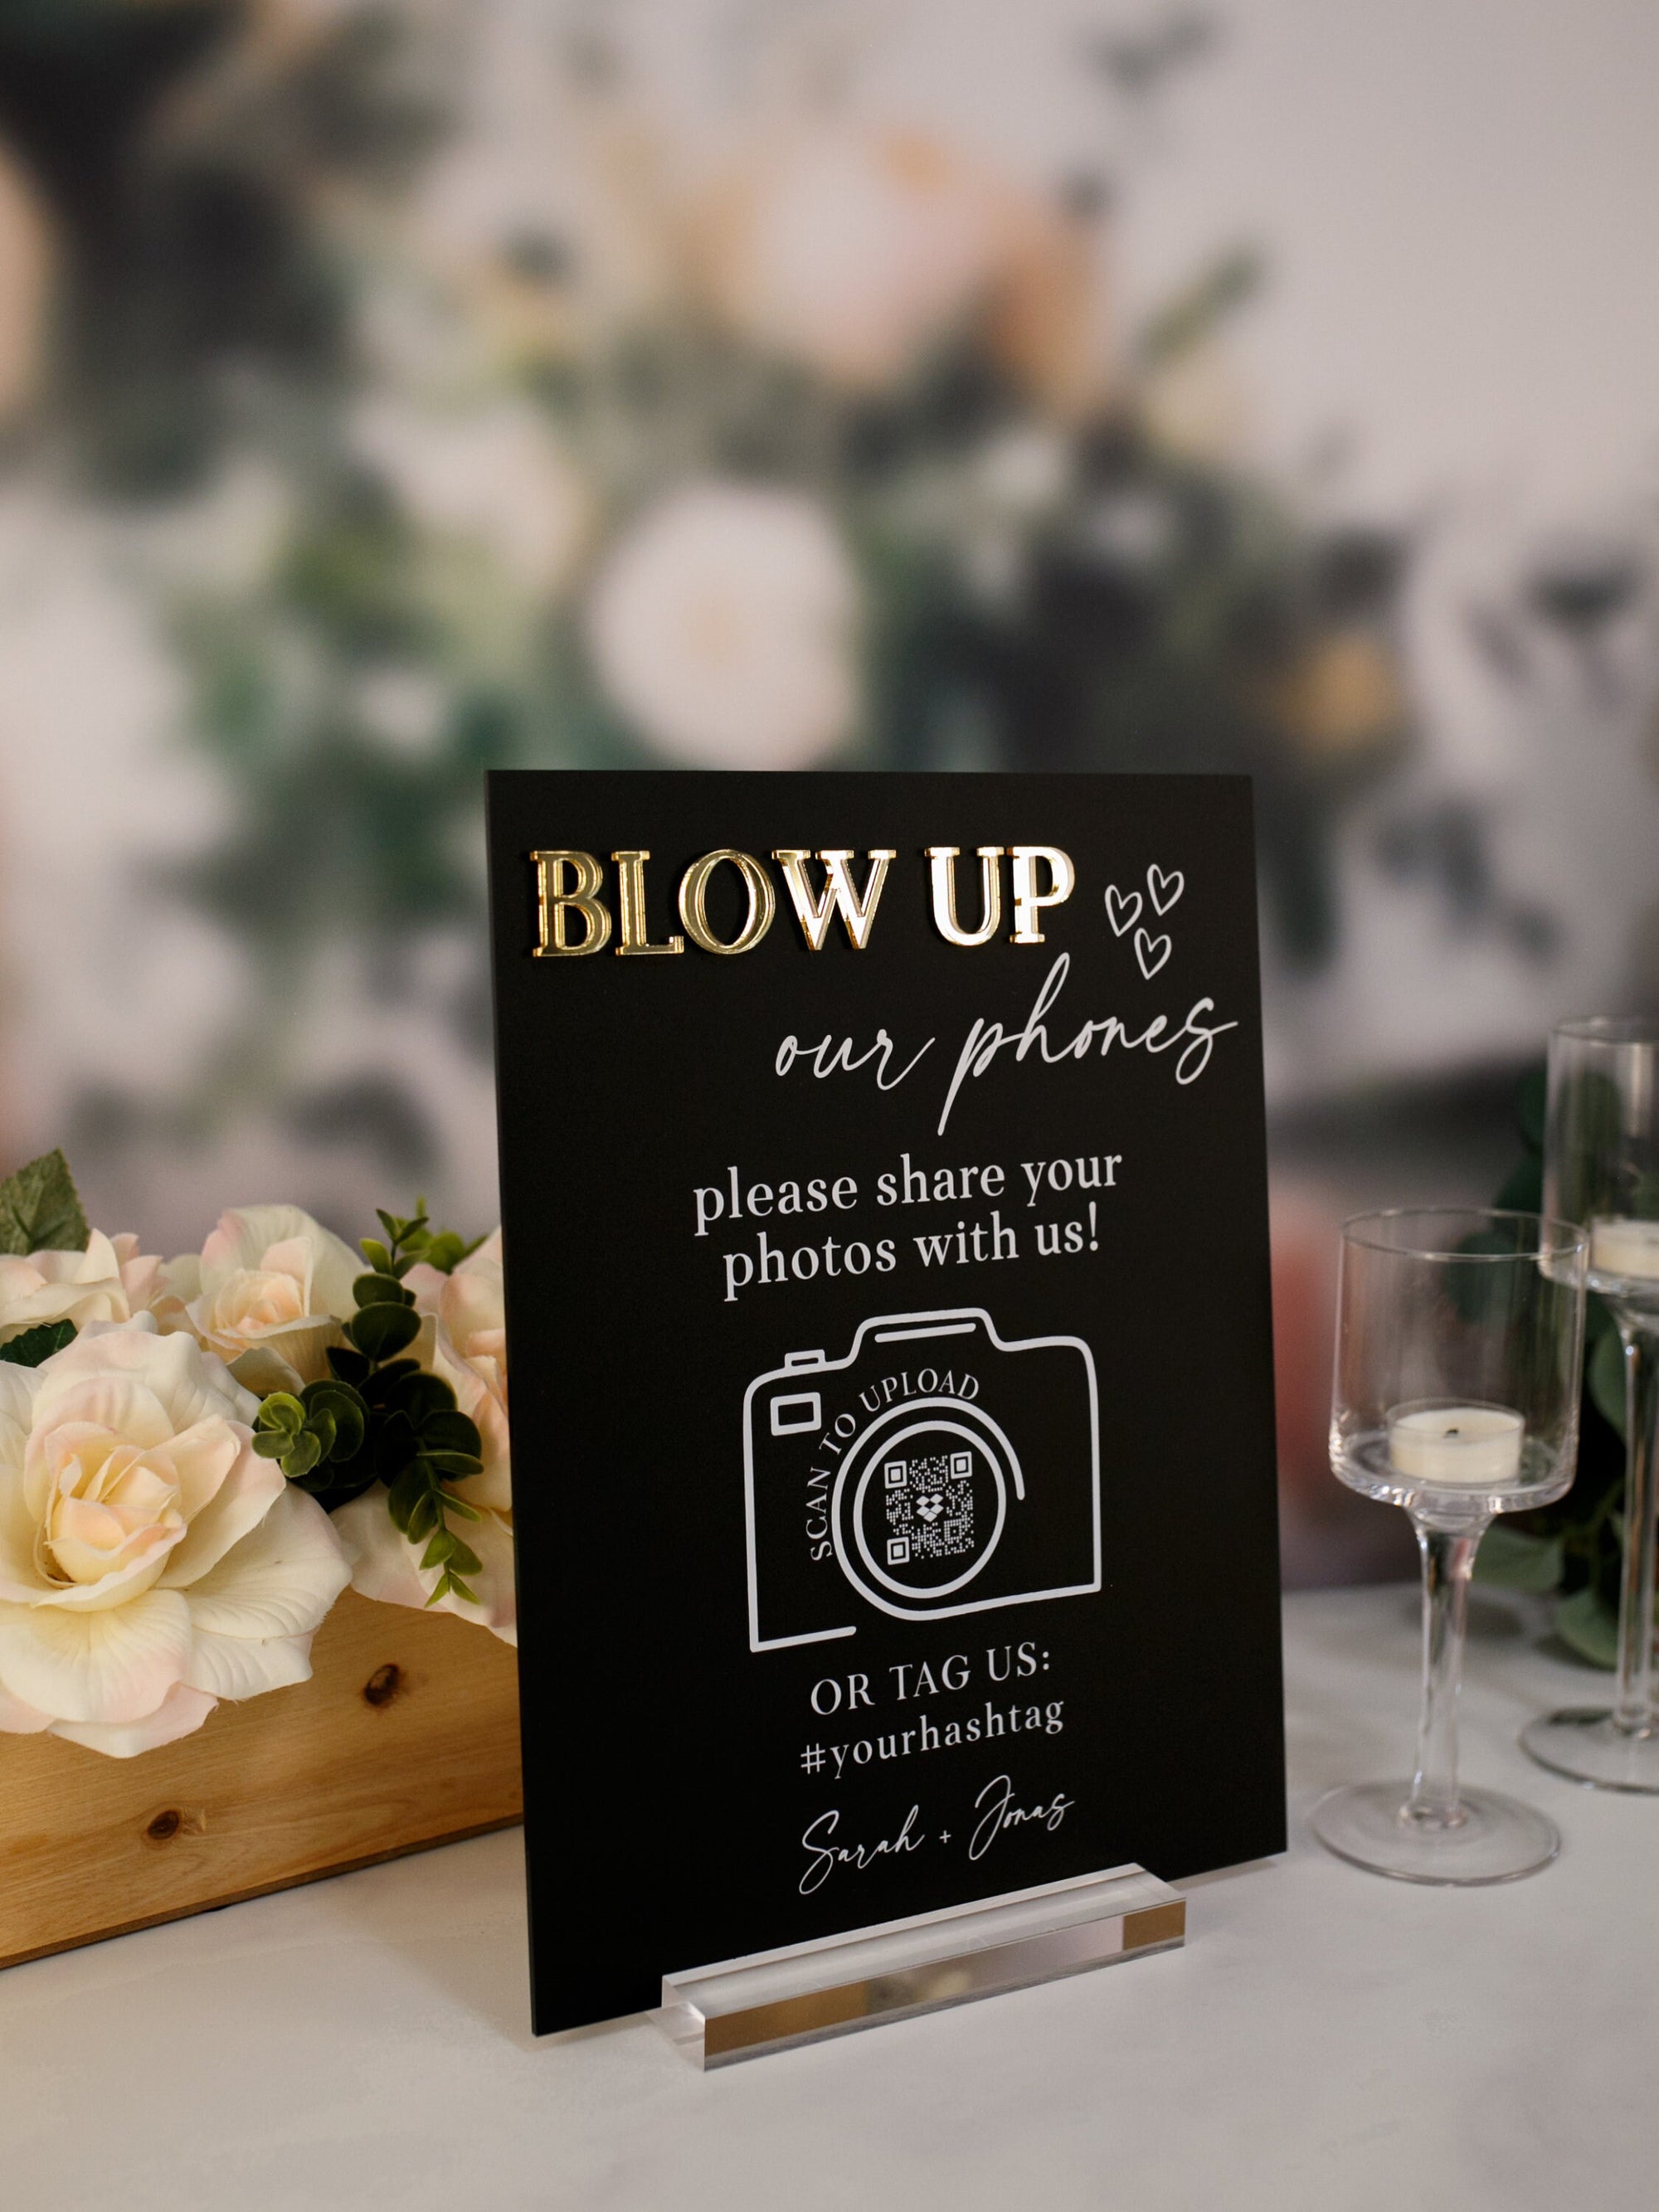 Blow Up Their Phones Wedding Table Sign Text or Video Bride and Groom Memories Acrylic Black and Gold Wedding I Spy Games, Photo Guestbook